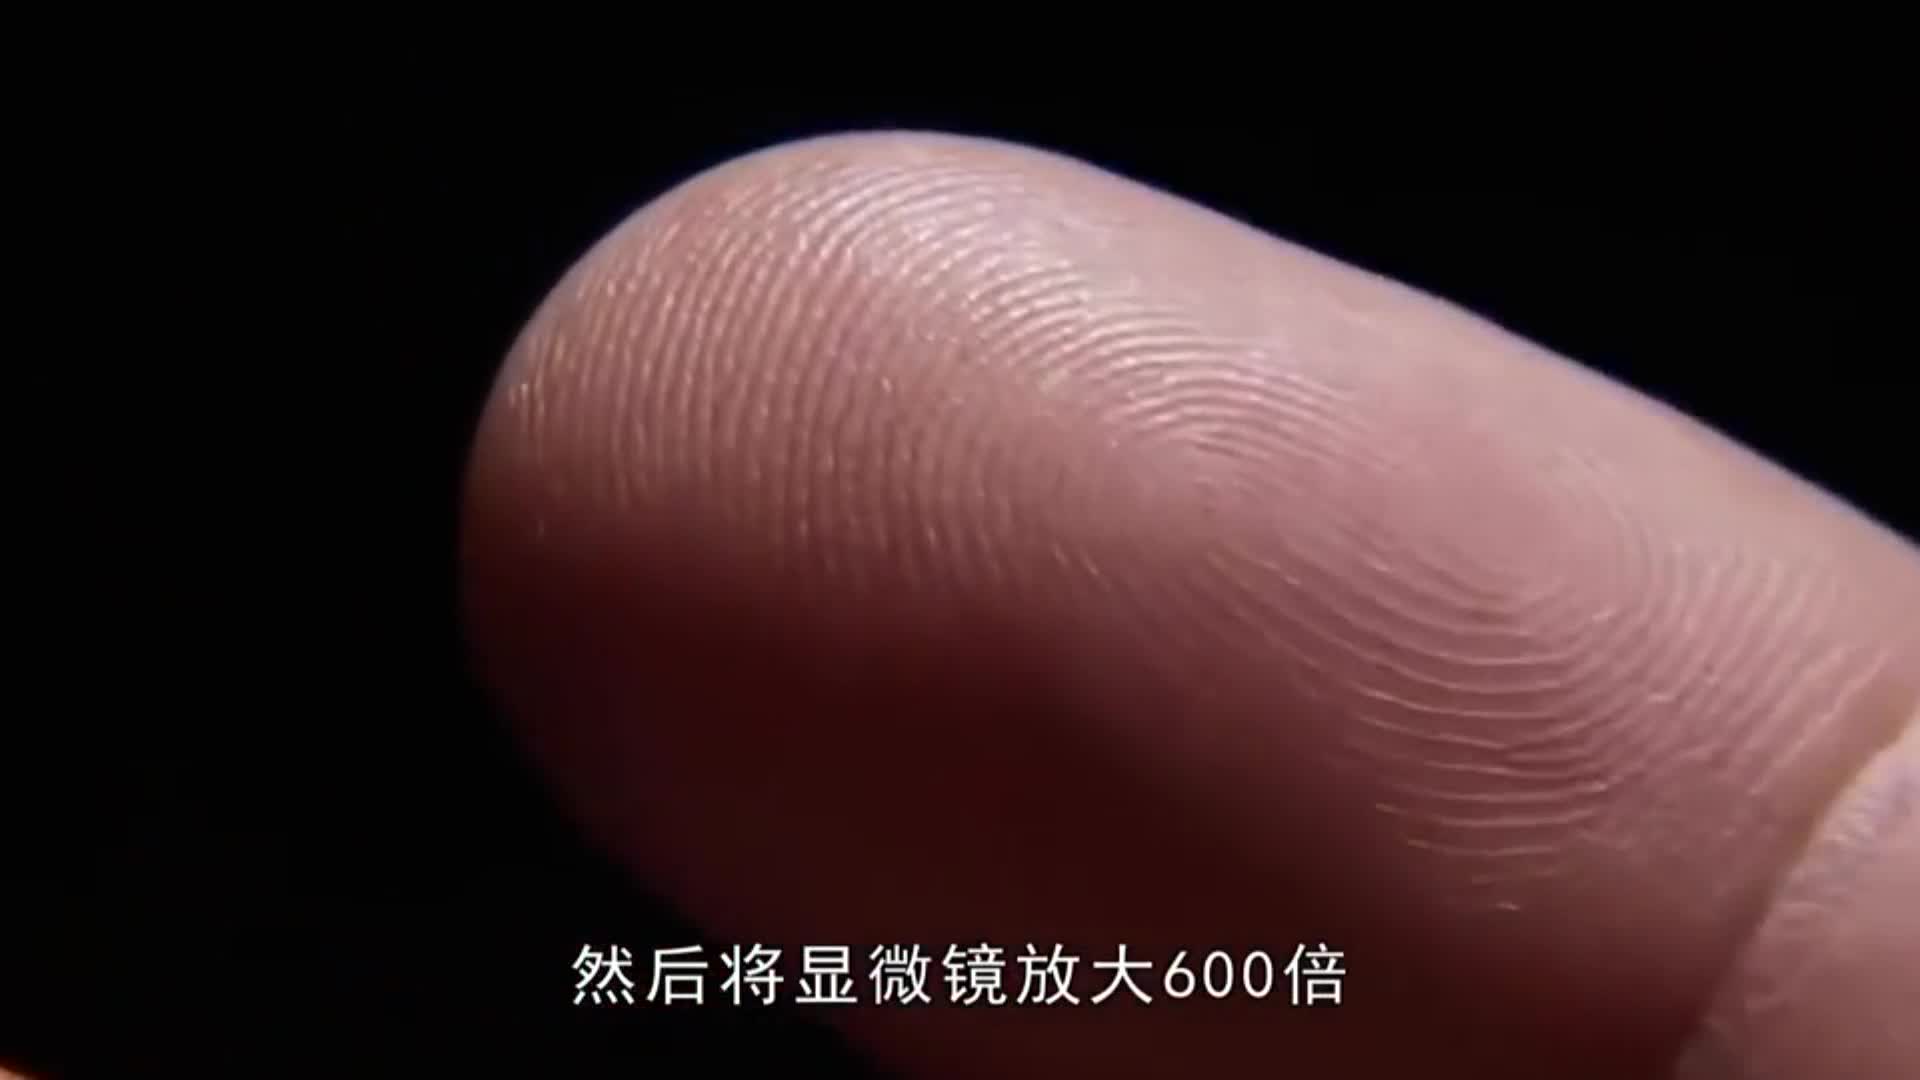 What is the sweating process like? It's amazing to put your finger under a microscope 600 times larger.